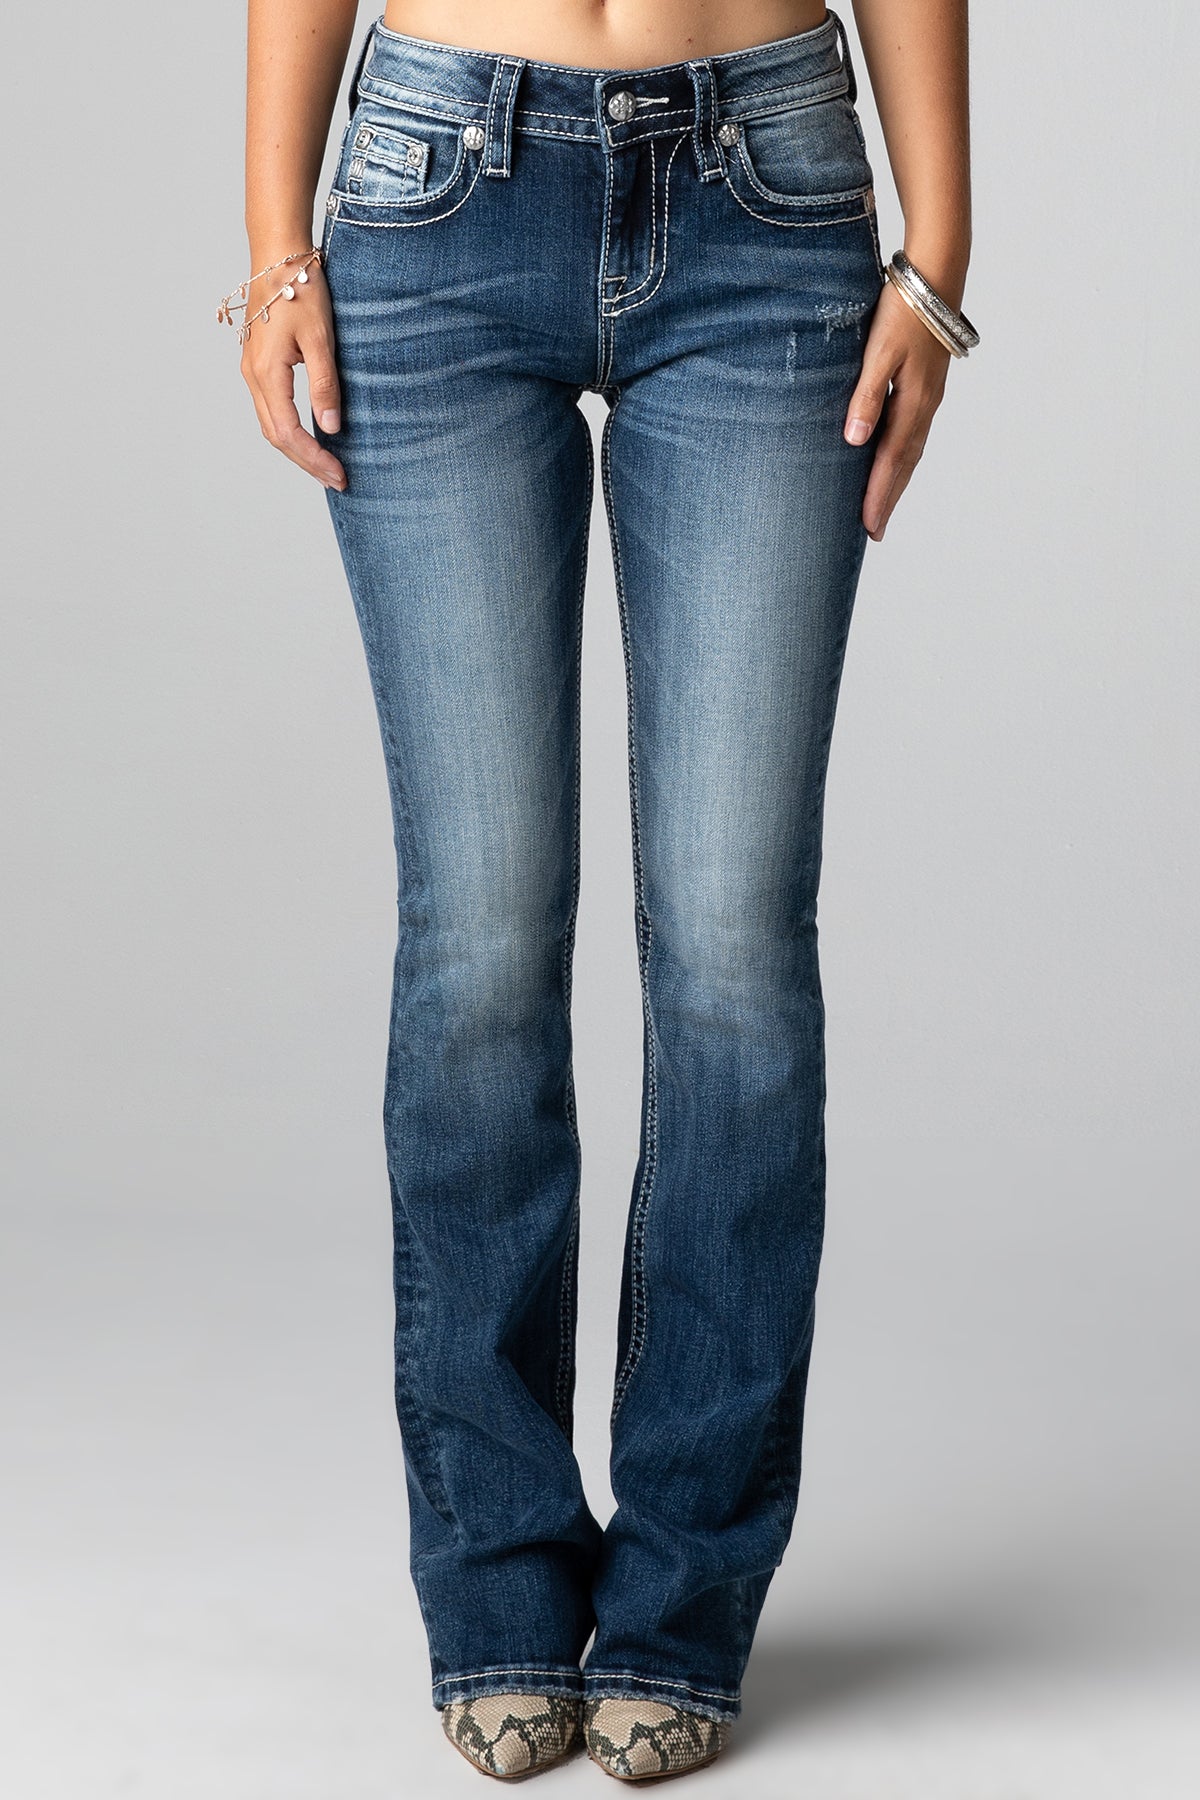 Shop Bootcut - Miss Me Online, Made In The USA